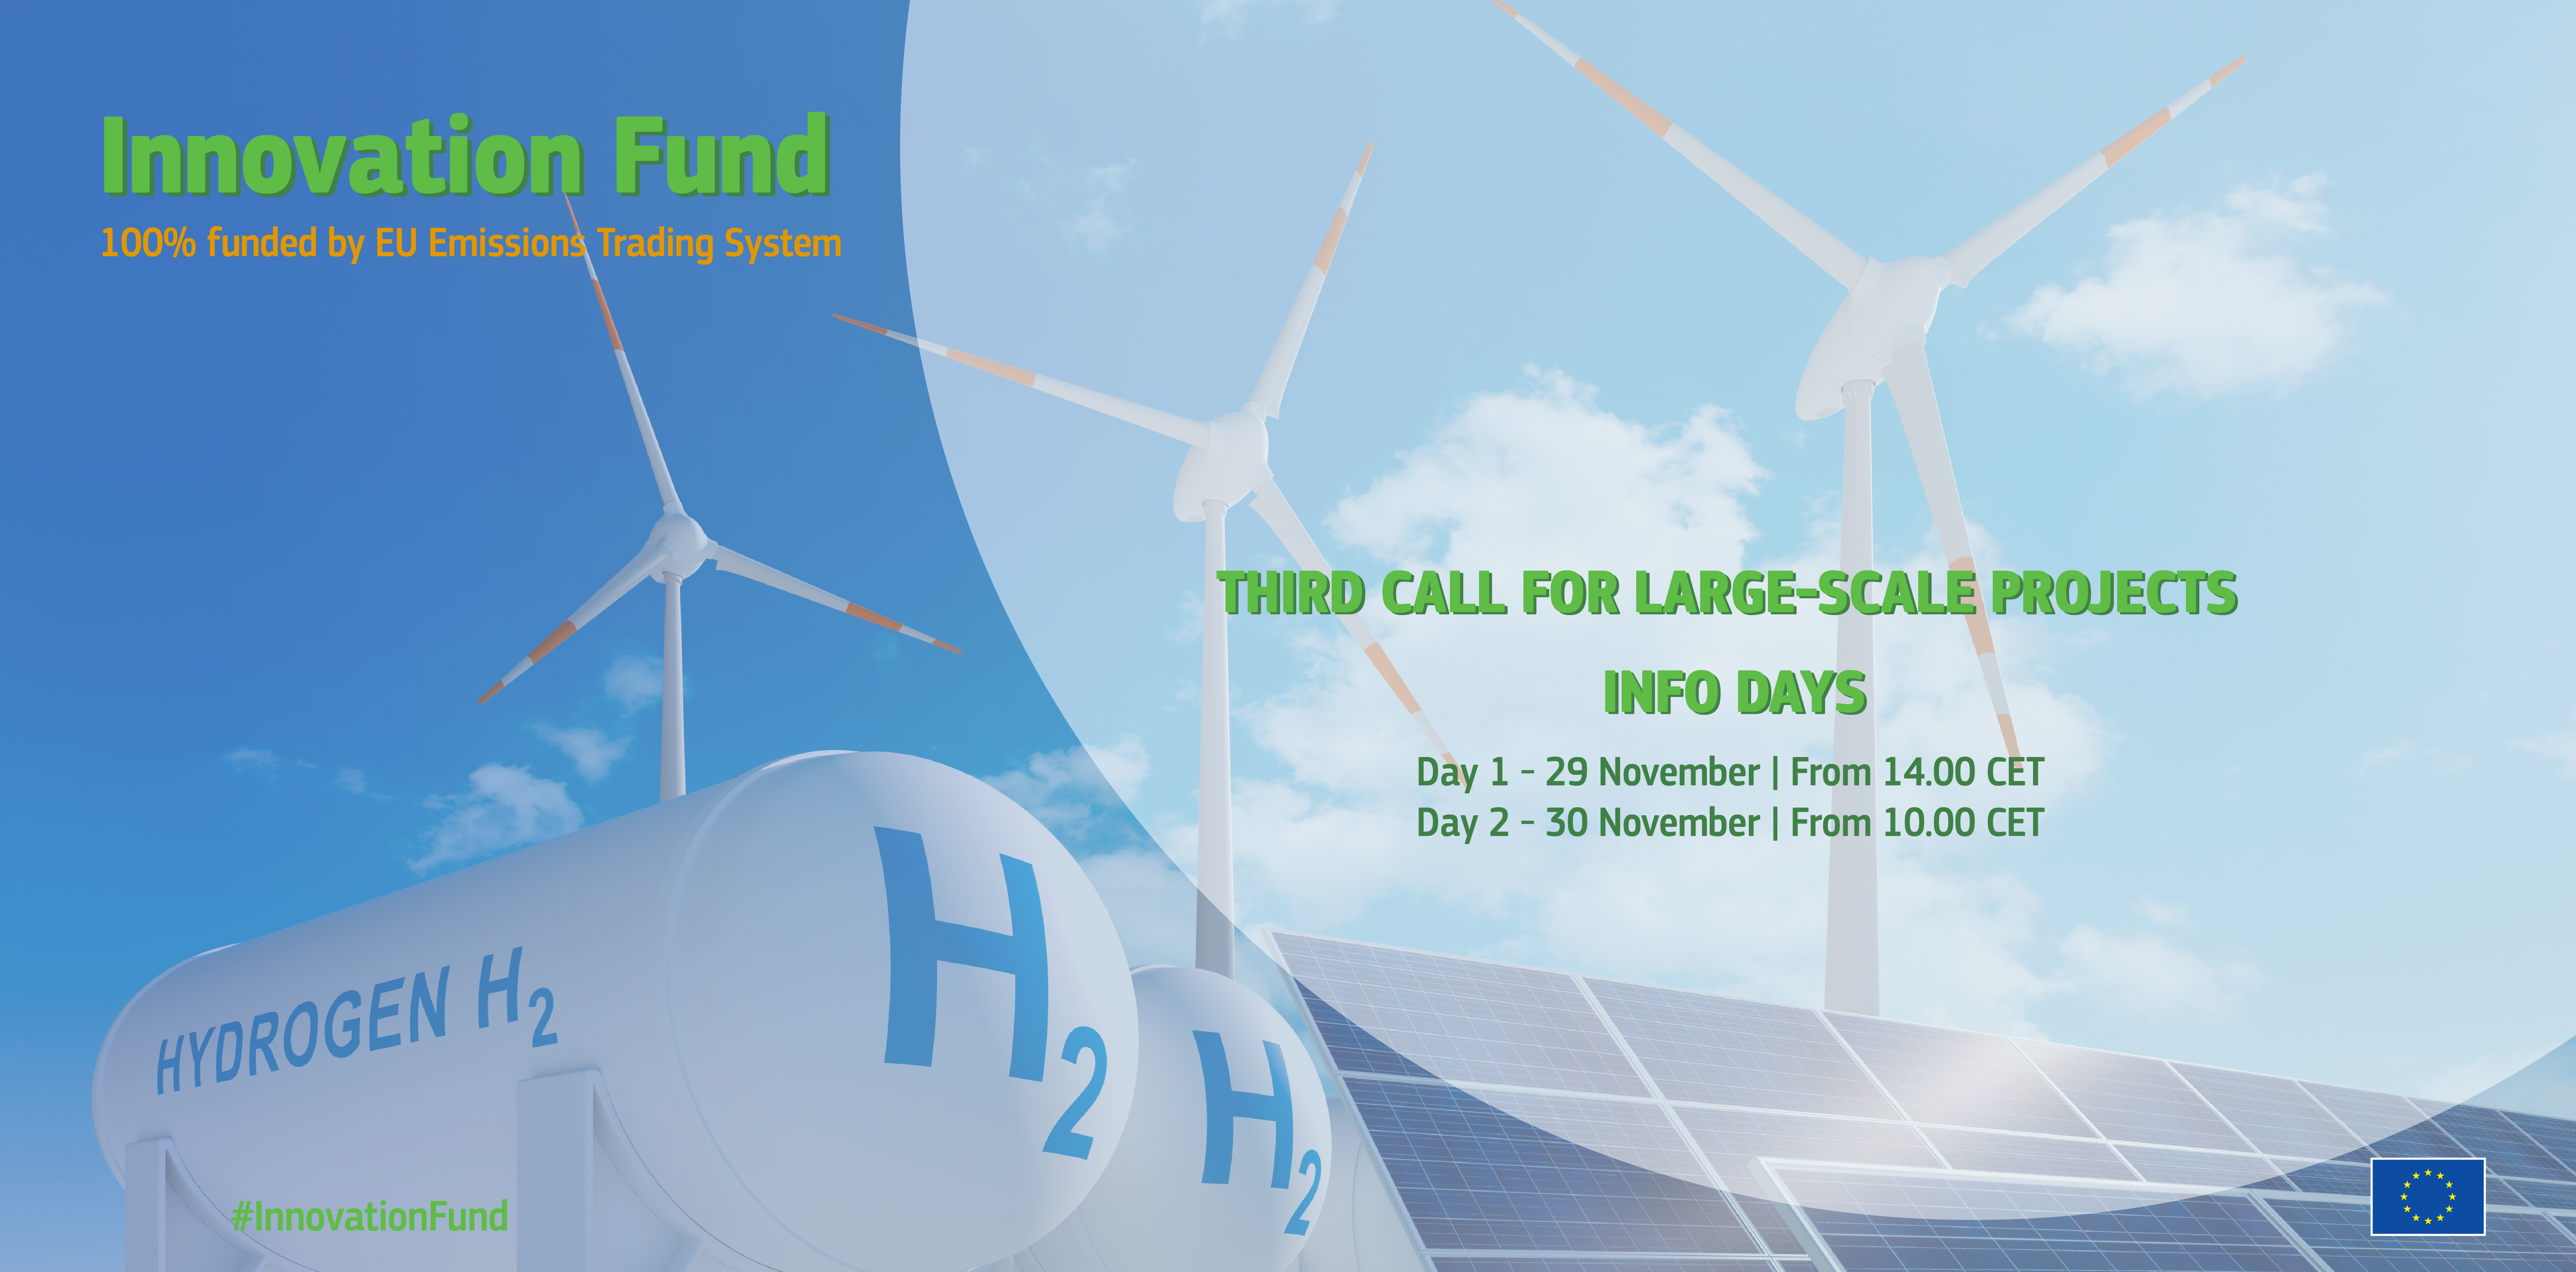 Innovation Fund Info Days - Third call for large-scale projects